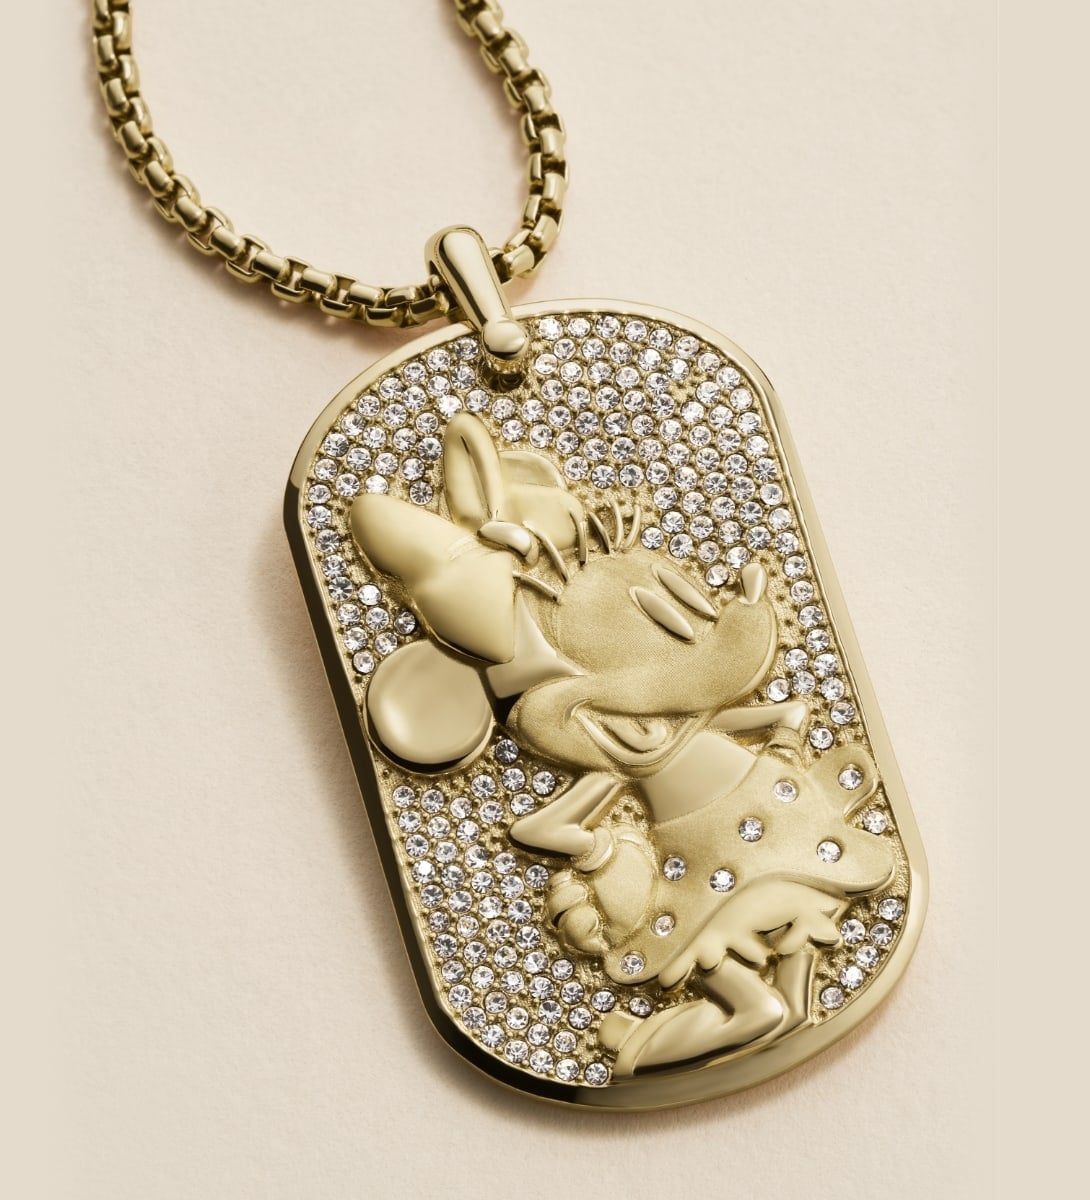 An animated GIF of two images. The first image features an all-black Mickey Mouse figurine pendant necklace studded with black hematite crystals. The second image showcases a gold-tone pendant of Minnie Mouse’s profile, accented with crystals.